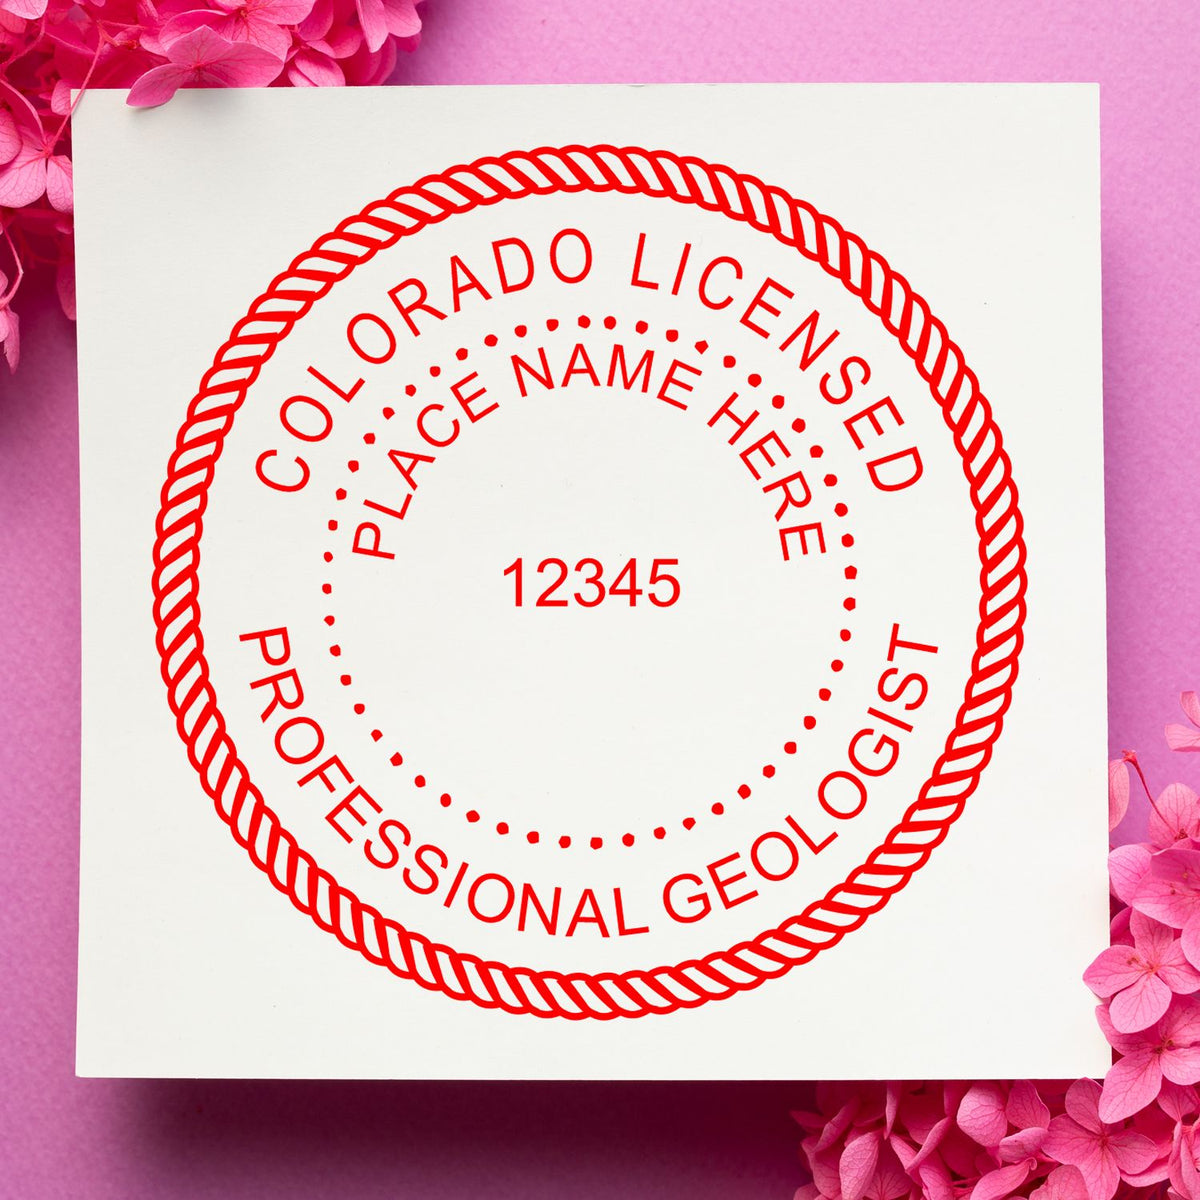 The Digital Colorado Geologist Stamp, Electronic Seal for Colorado Geologist stamp impression comes to life with a crisp, detailed image stamped on paper - showcasing true professional quality.